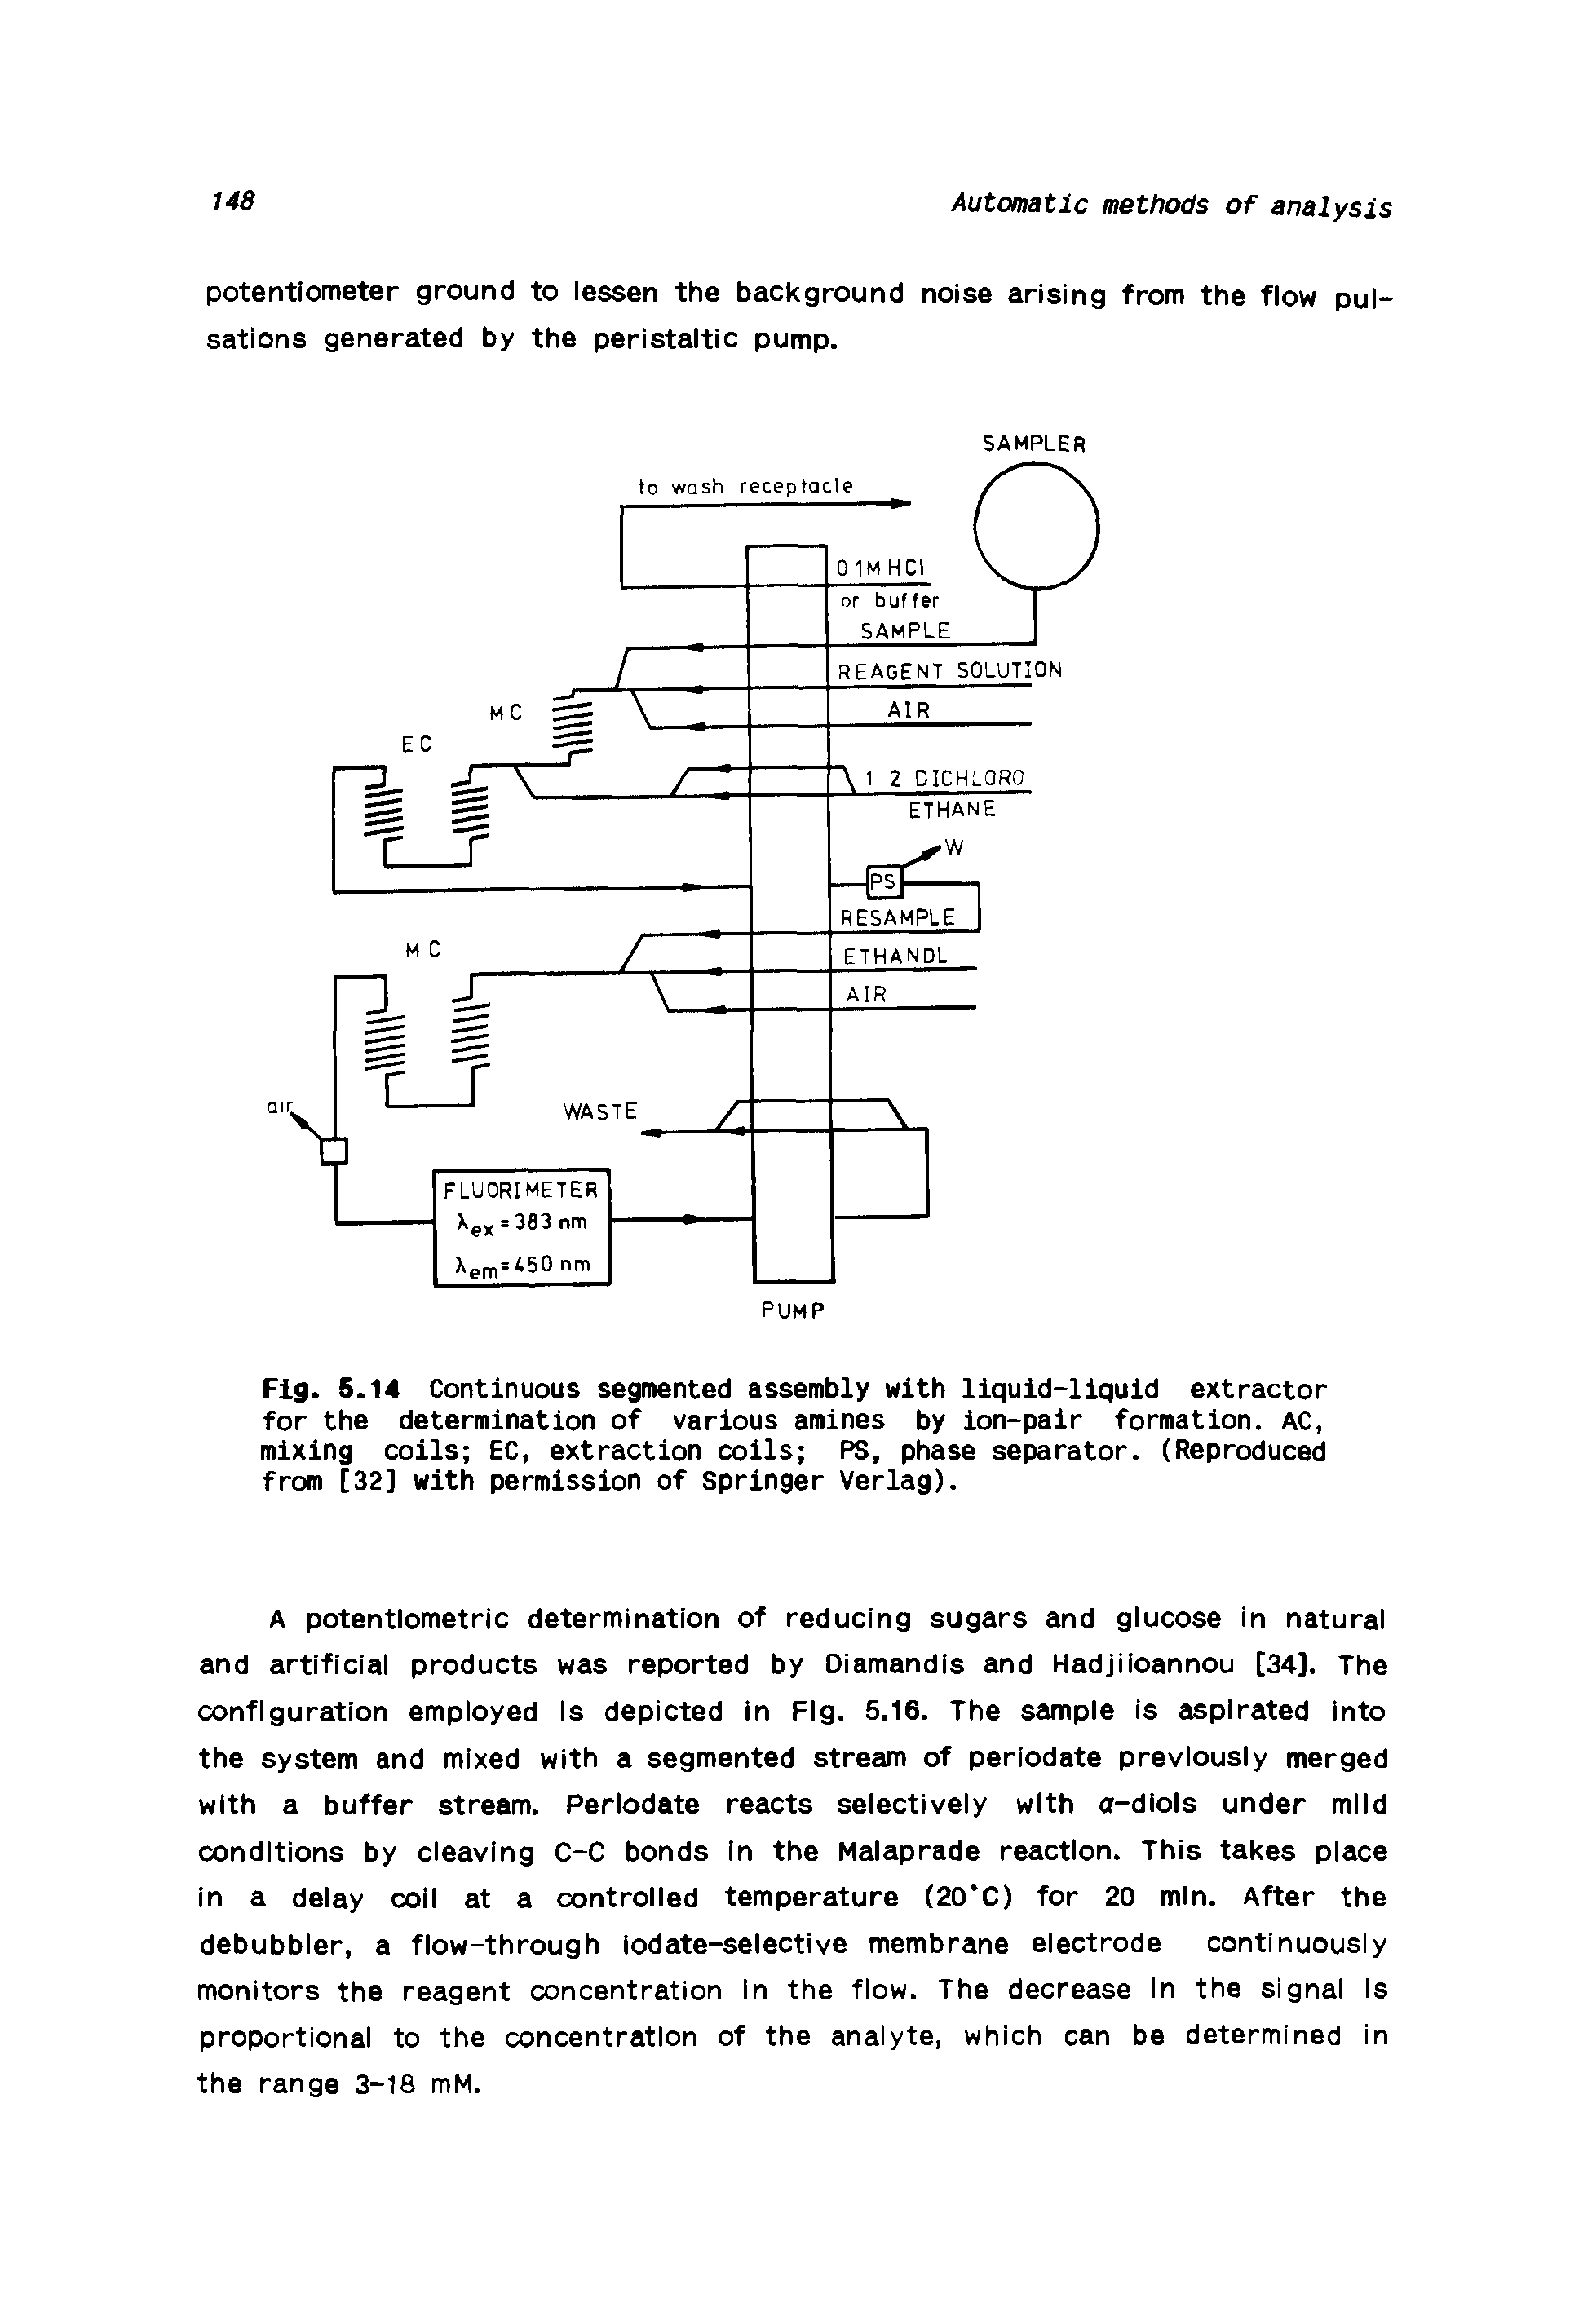 Fig. 5.14 Continuous segmented assembly with liquid-liquid extractor for the determination of various amines by ion-pair formation. AC, mixing coils EC, extraction coils PS, phase separator. (Reproduced from [32] with permission of Springer Verlag).